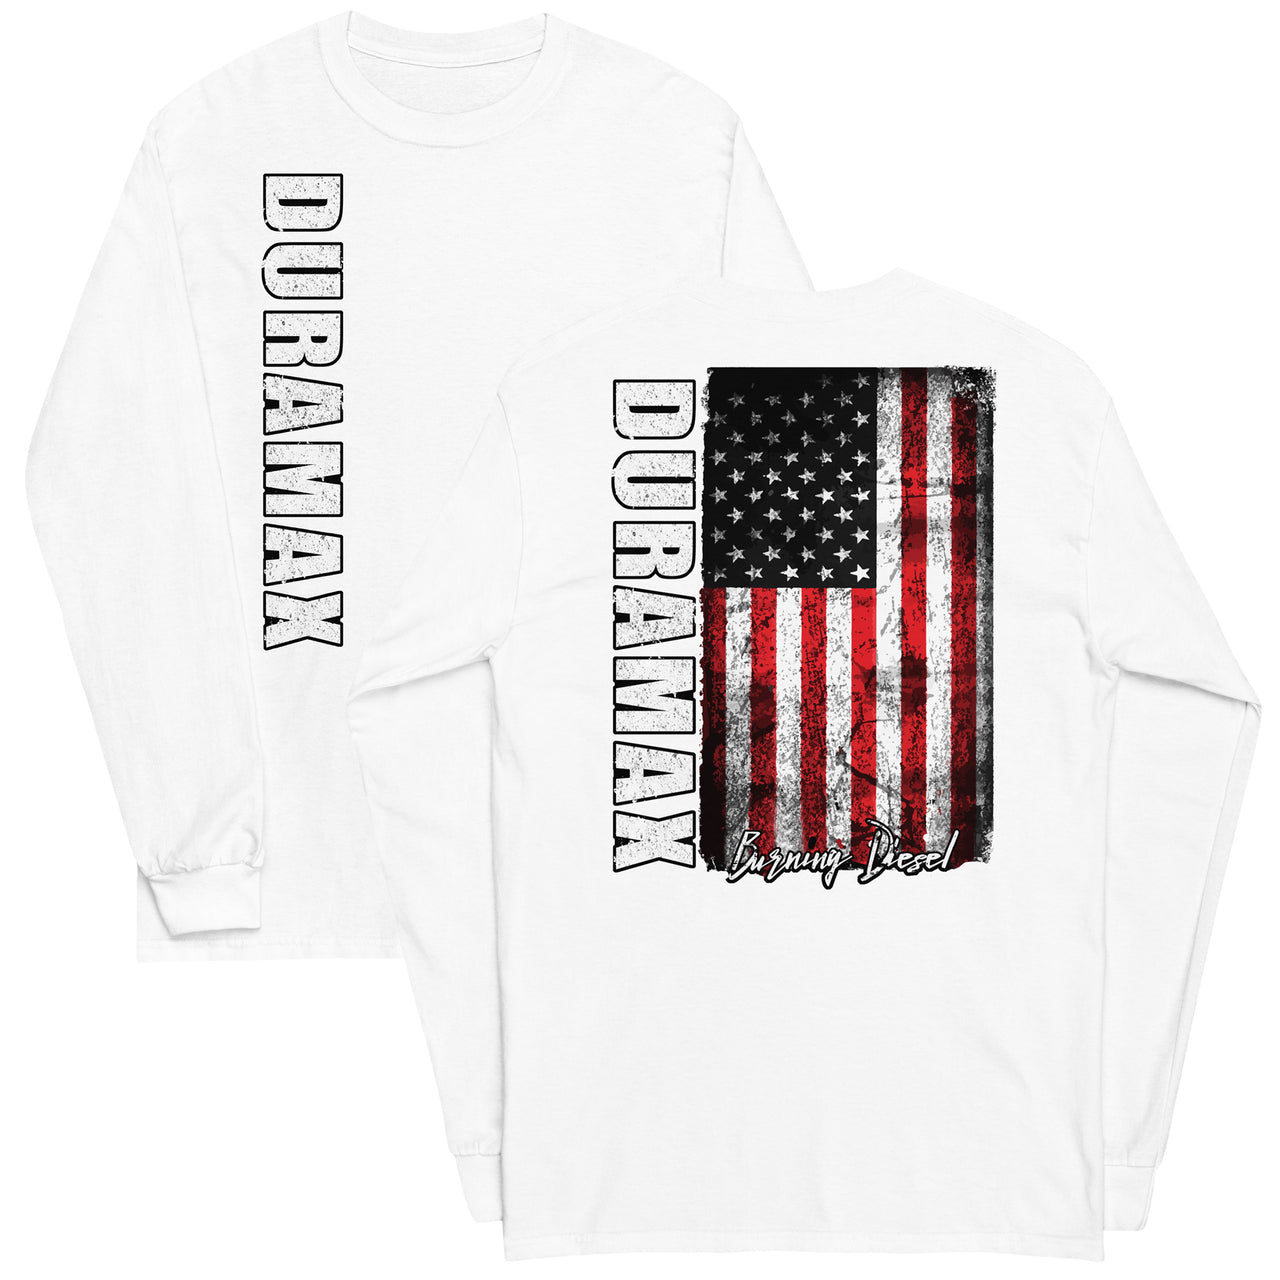 Duramax Shirt With American Flag Design Mens Long Sleeve T-Shirt in white